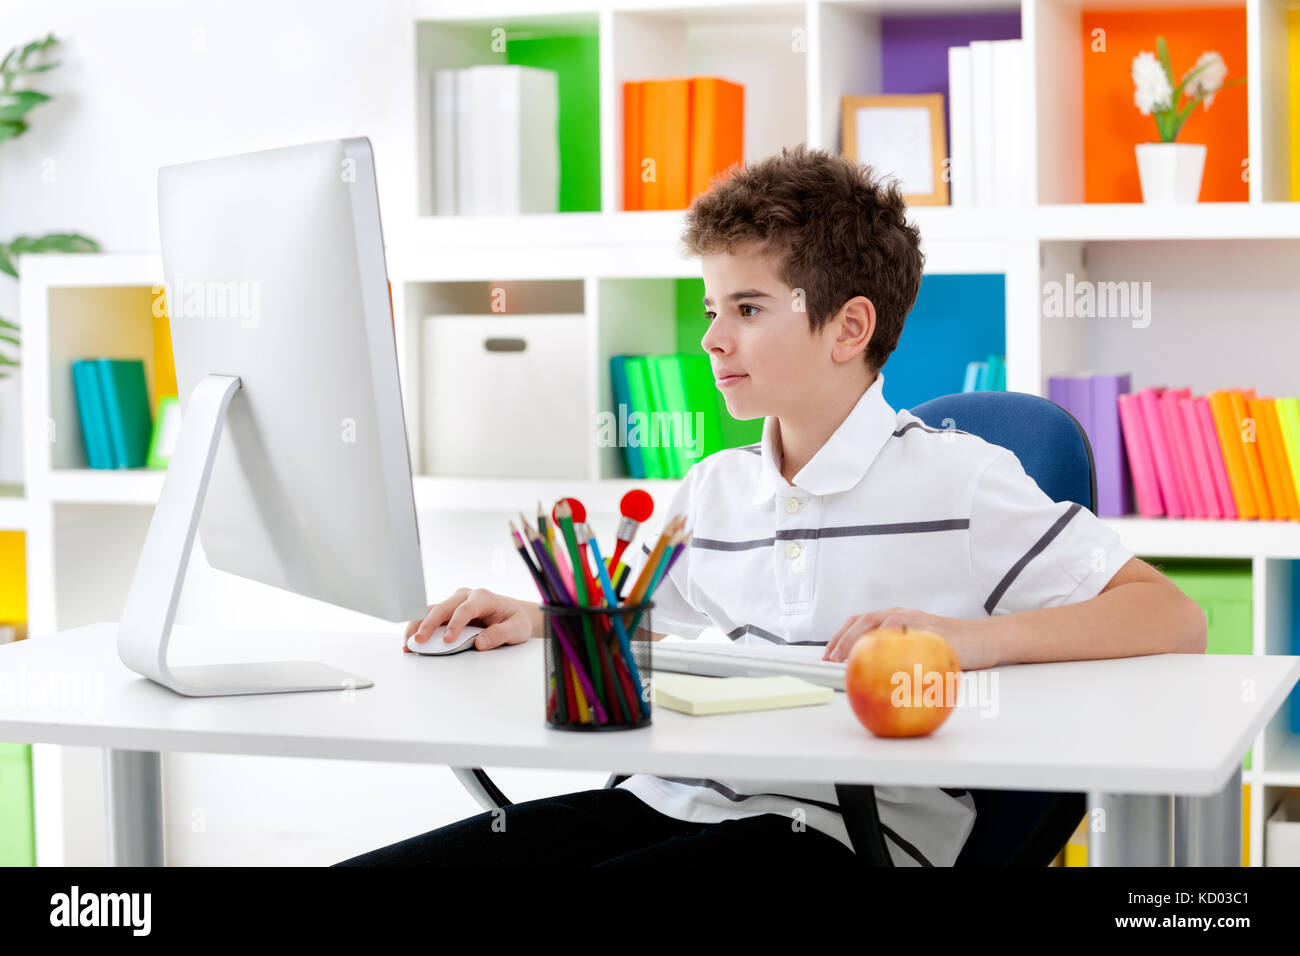 Concentrated young boy using computer in his room Stock Photo